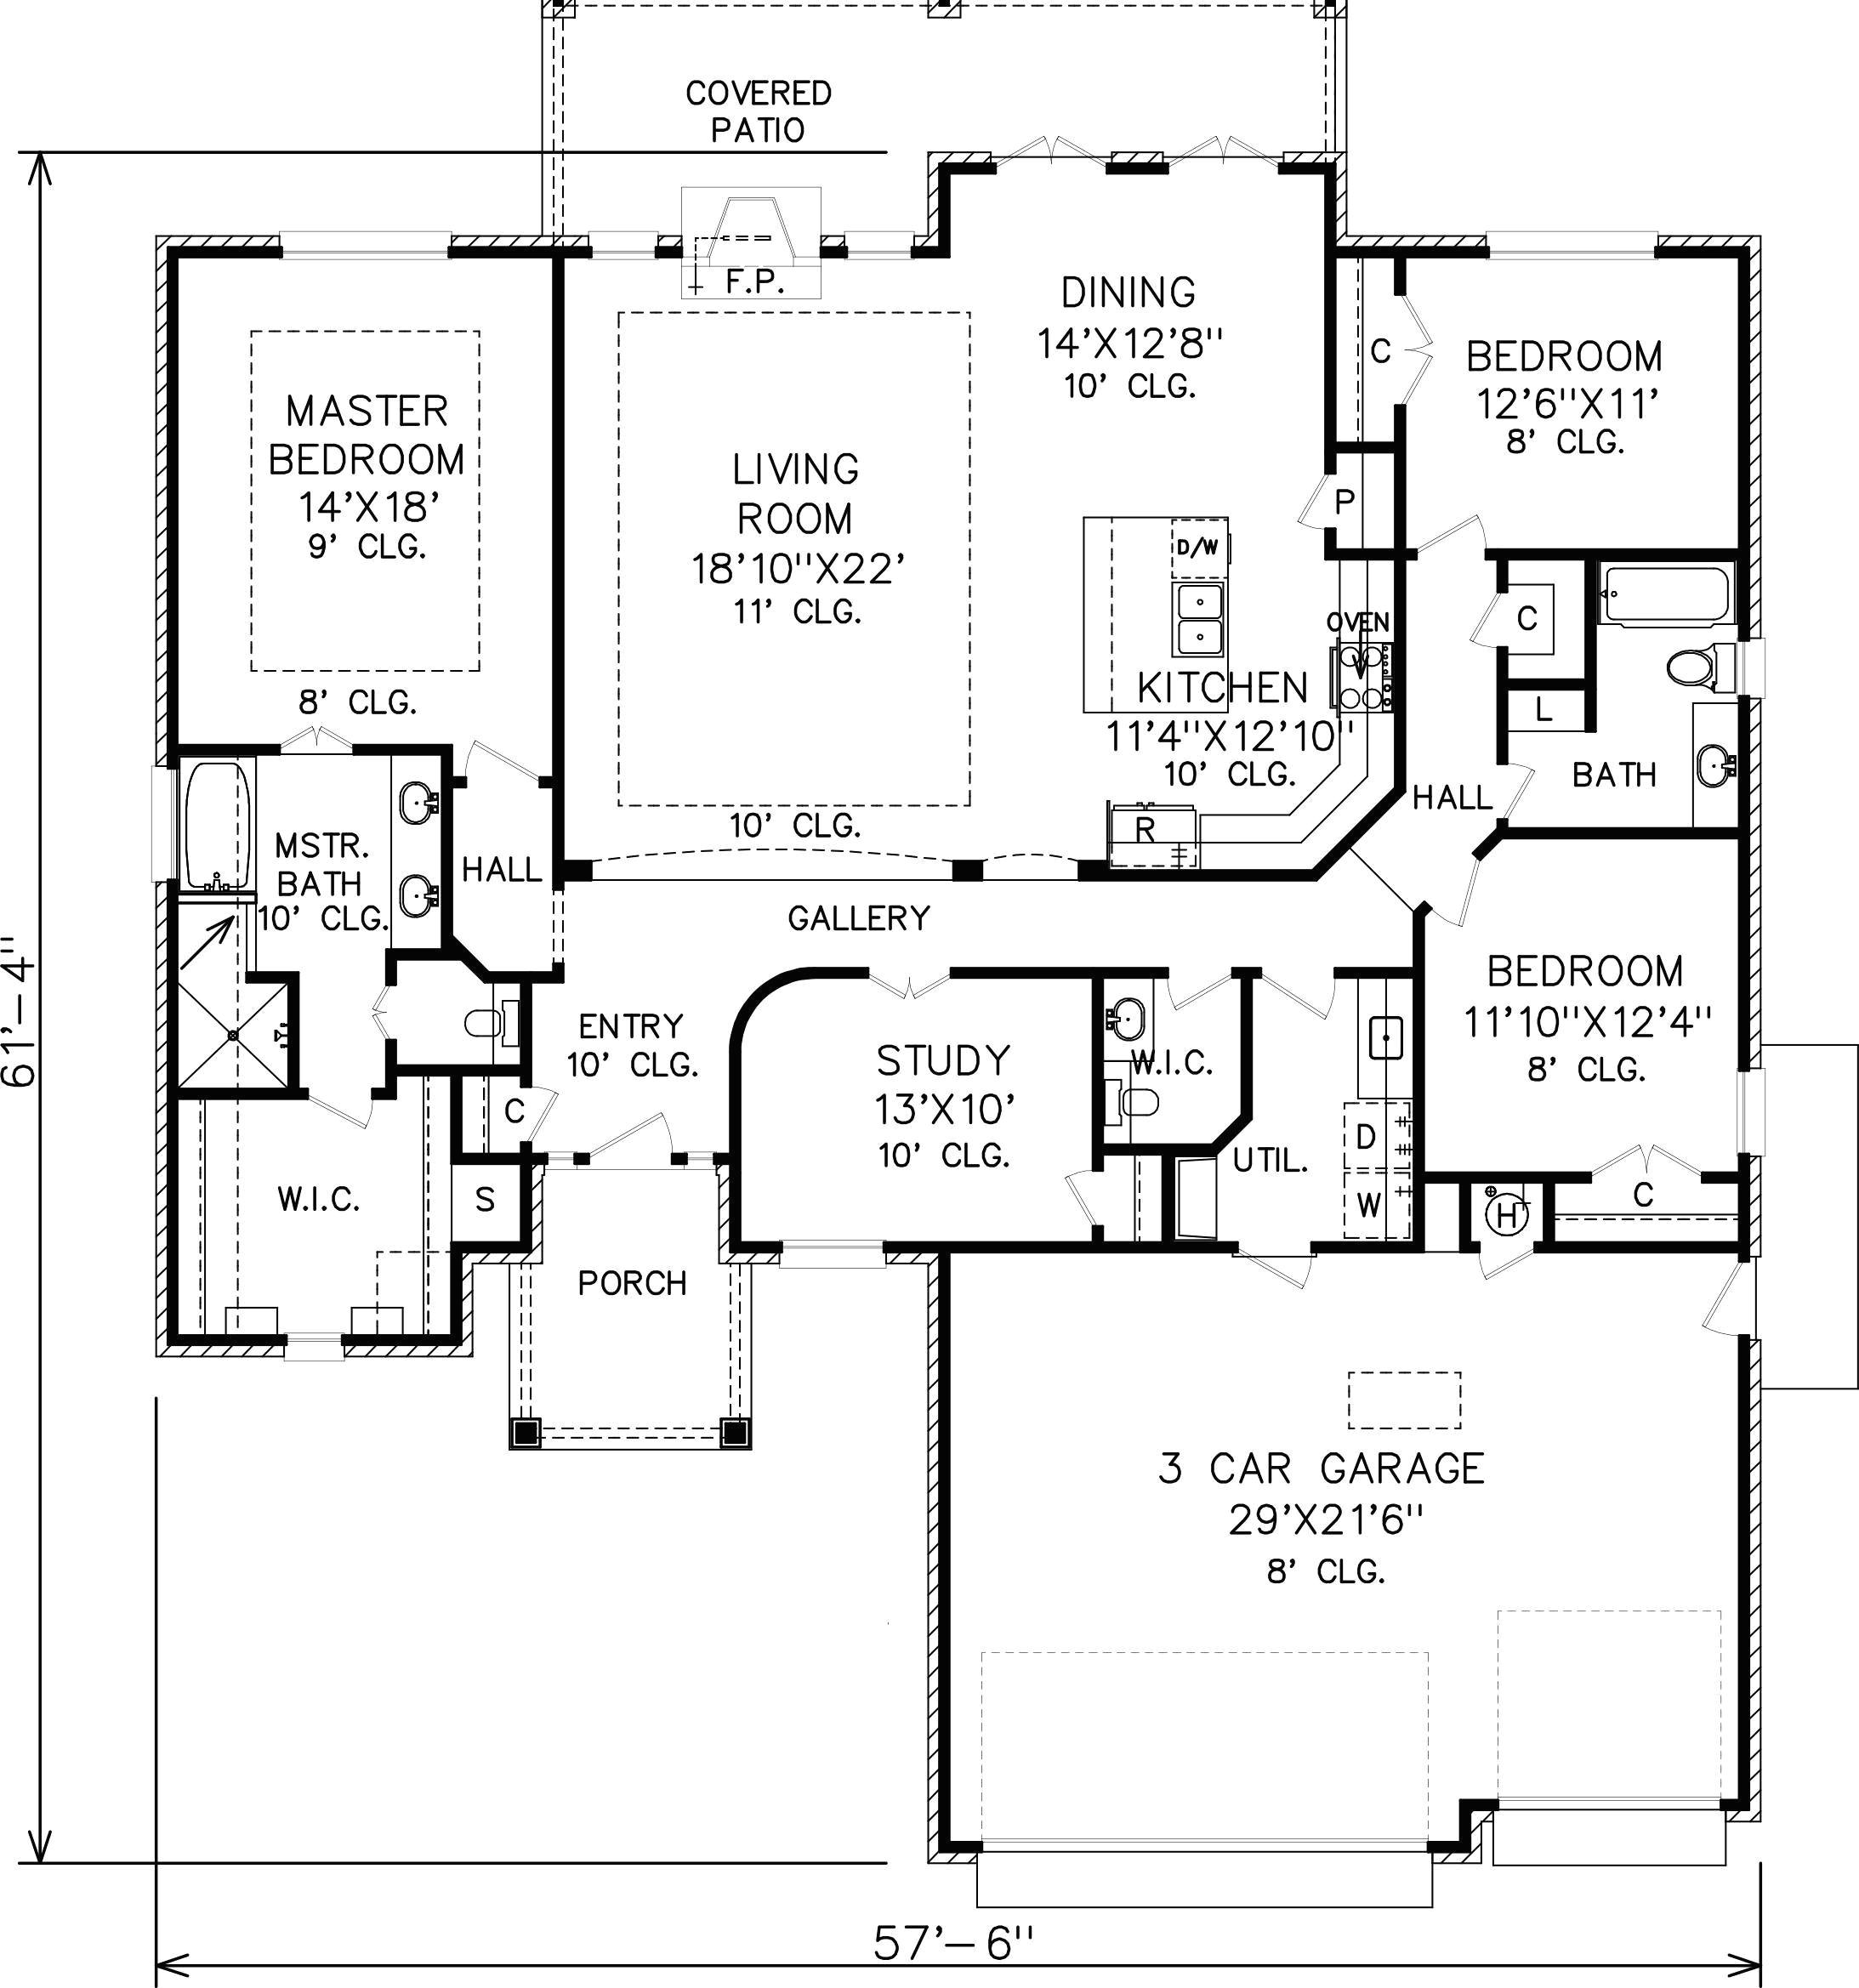 Drawing T Square How to Plan A House Elegant House Plan Lovely Square Home Plans Best